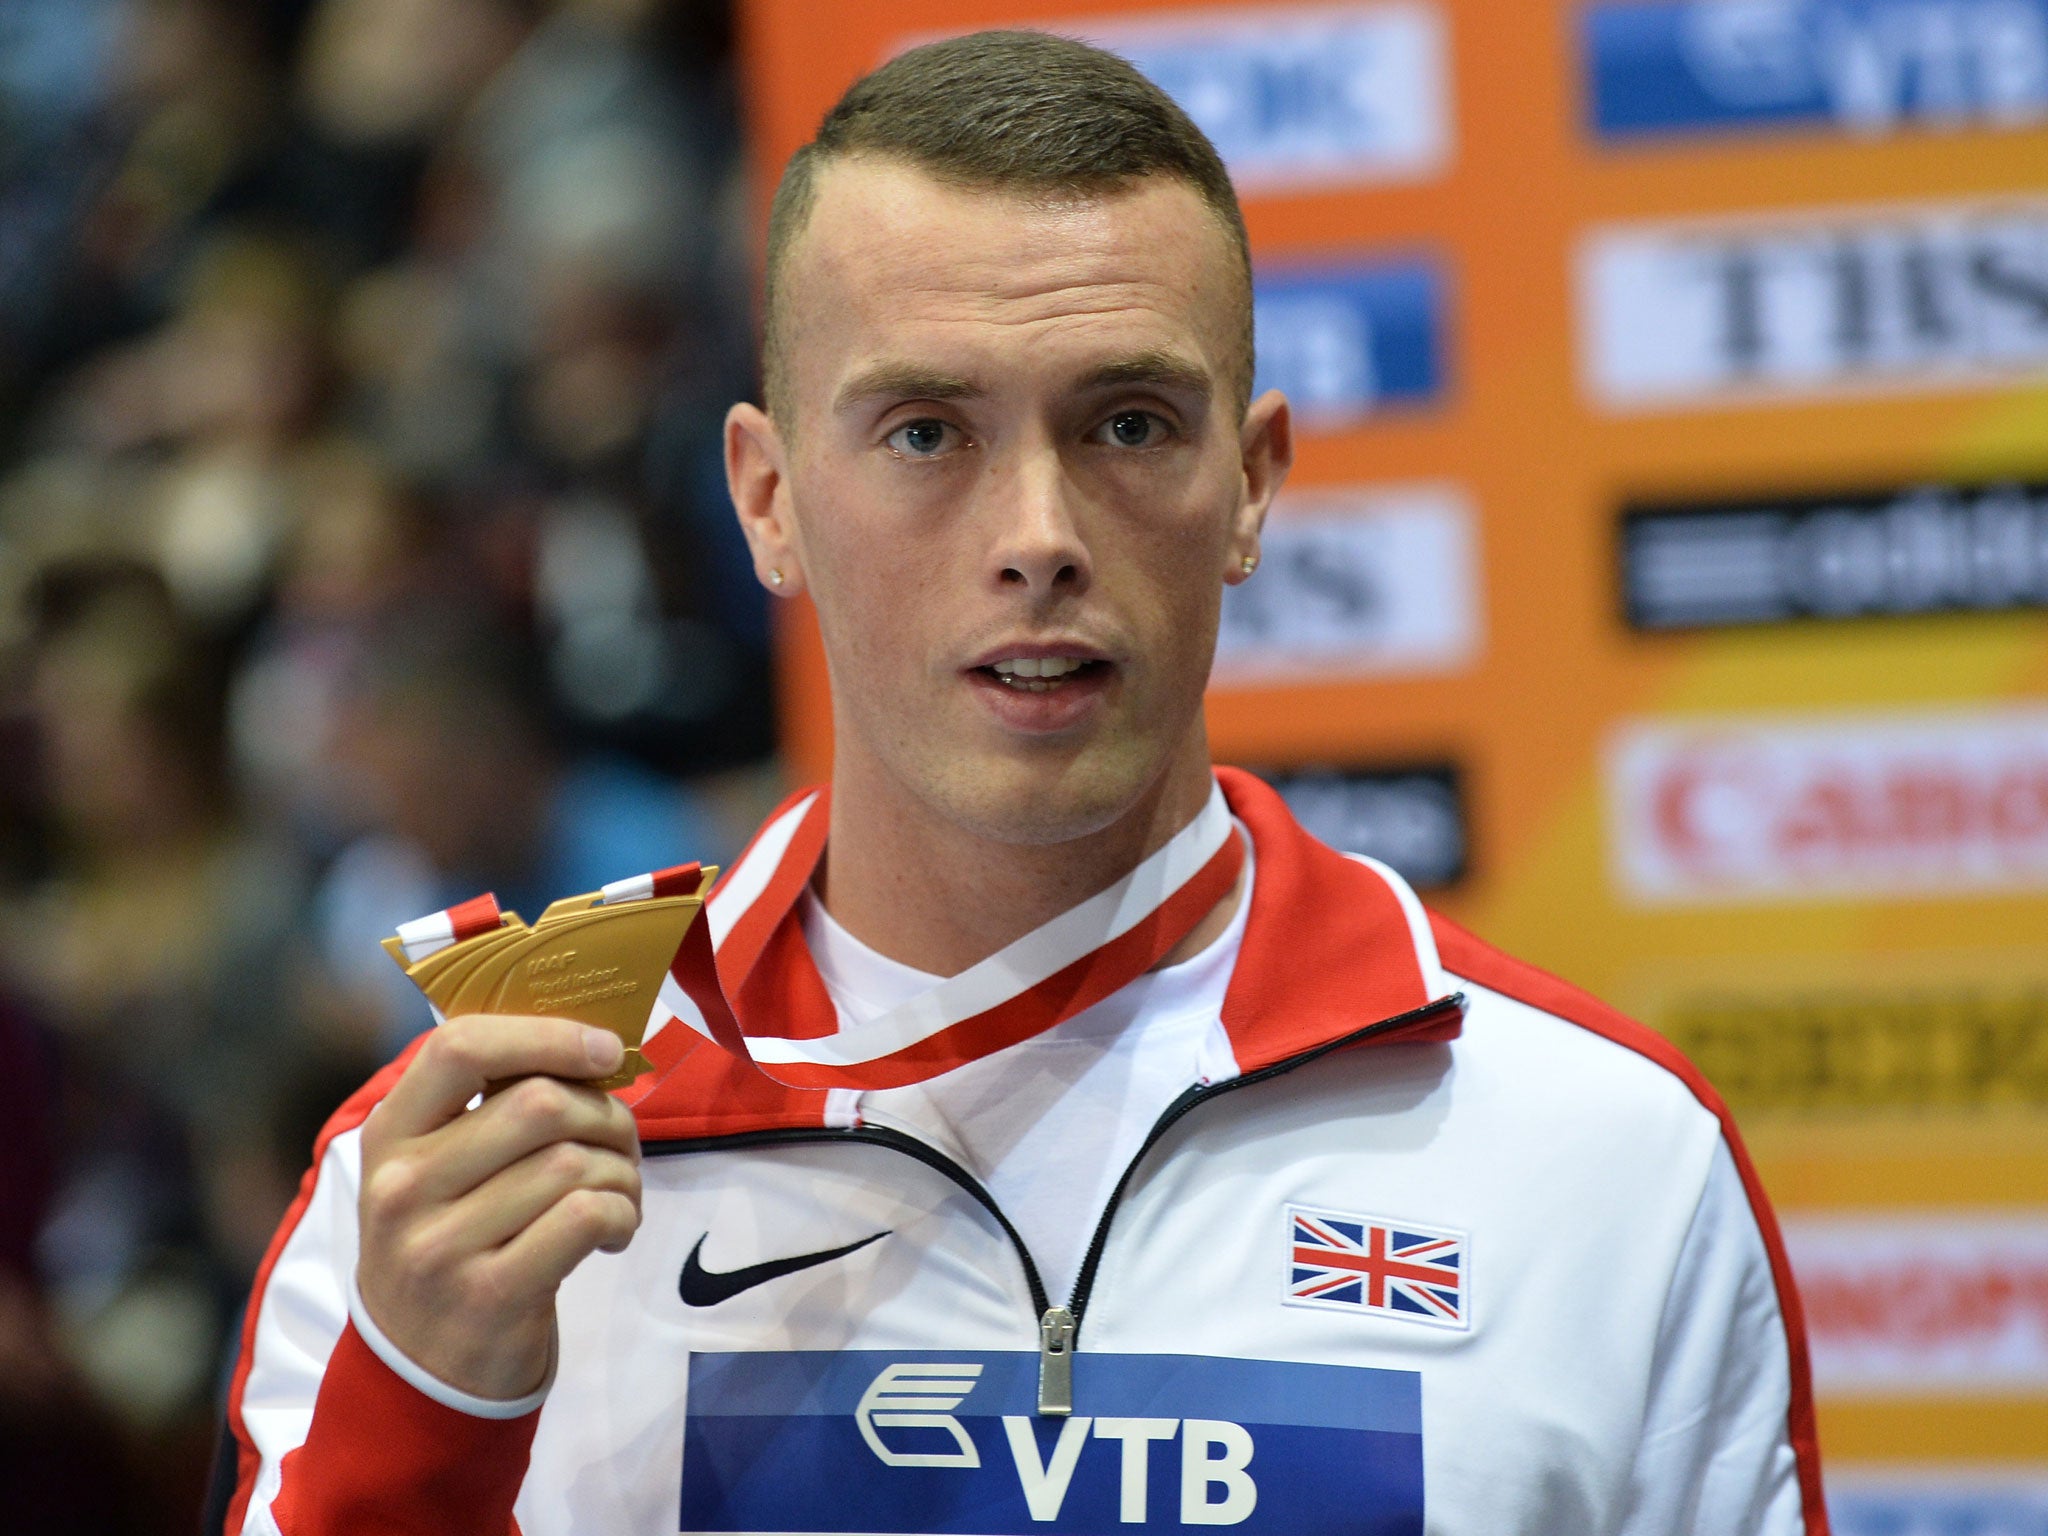 Gold medalist Great Britain's Richard Kilty celebrates on the podium of the Men 60m Final